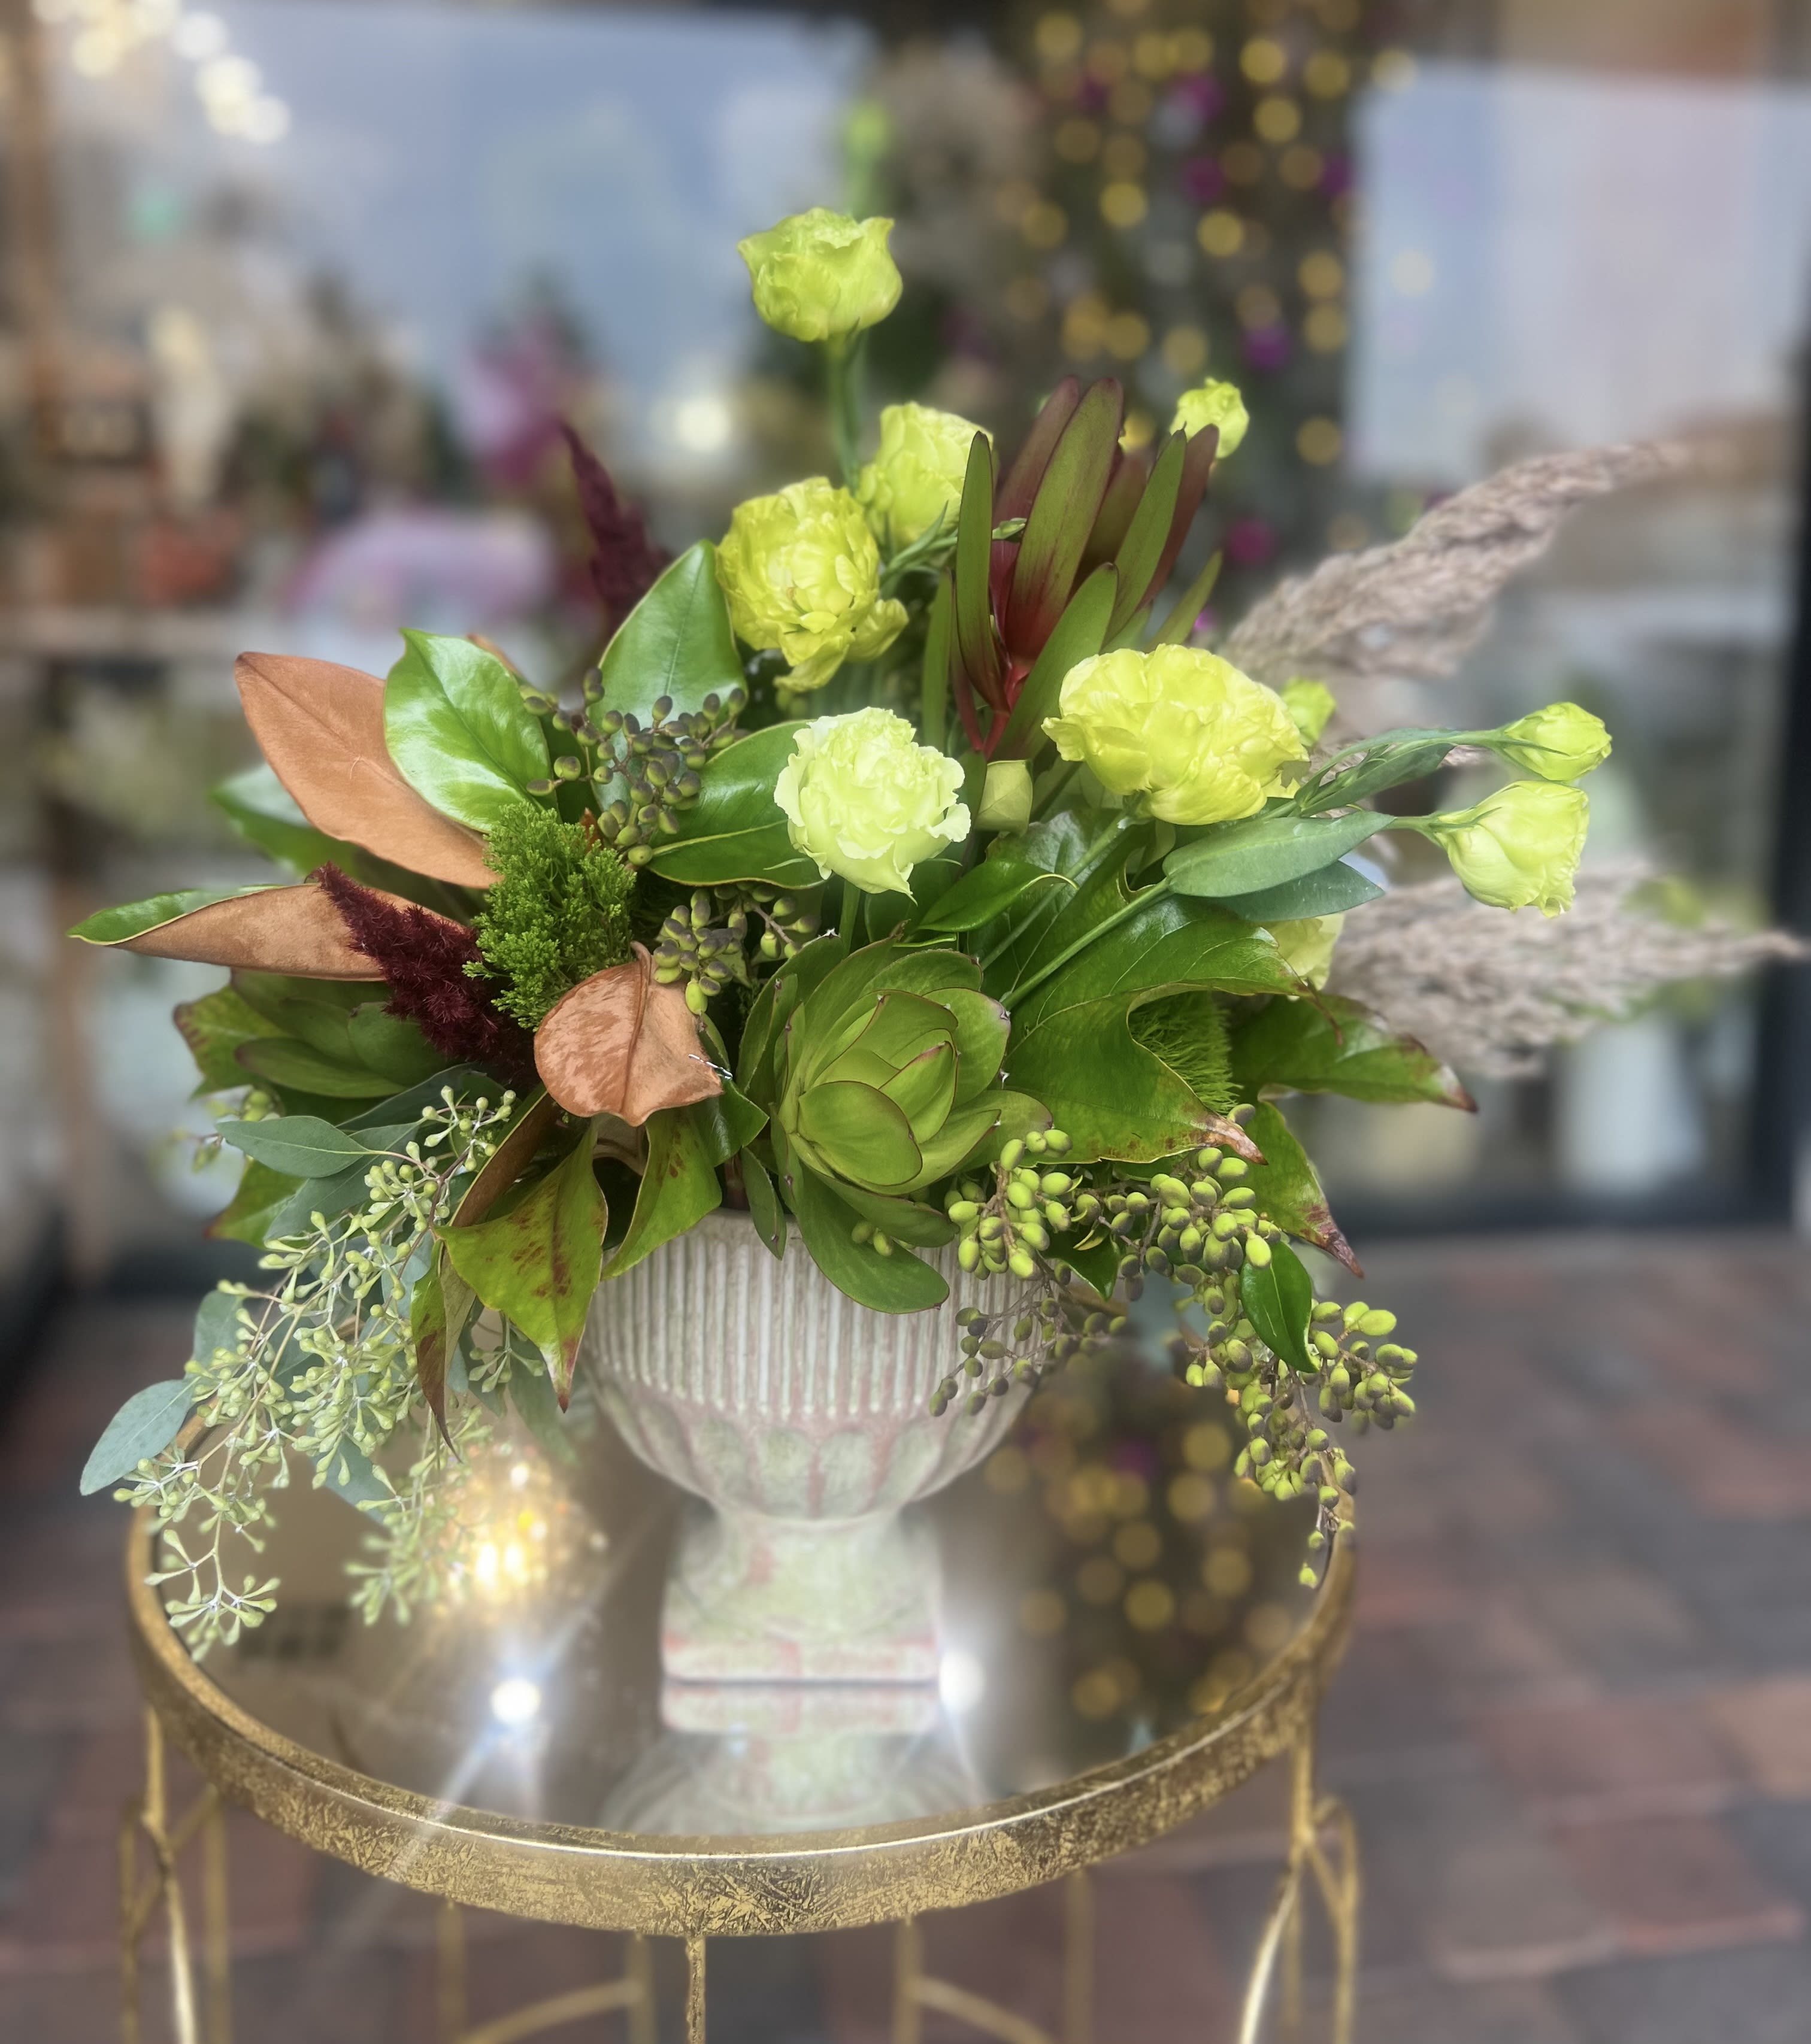 Natural Beauty  - Natural arrangement with an assortment of greens and natural blooms in beautiful ceramic urn vase 